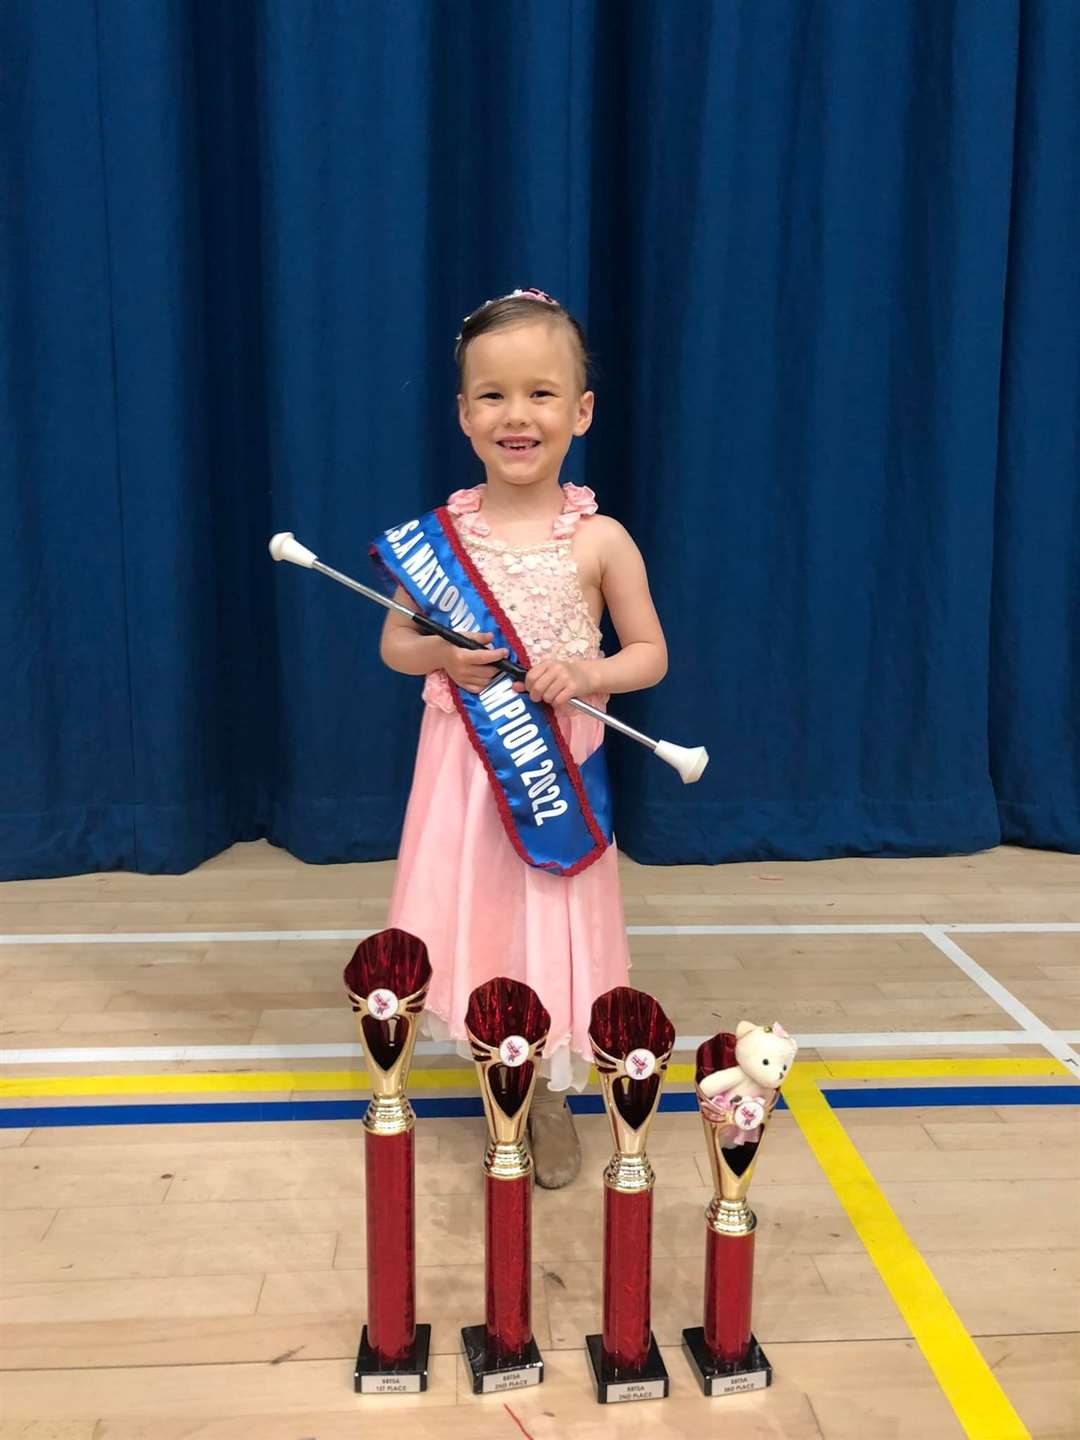 Aaliyah Ord has become the national champion for solo Baton Twirling